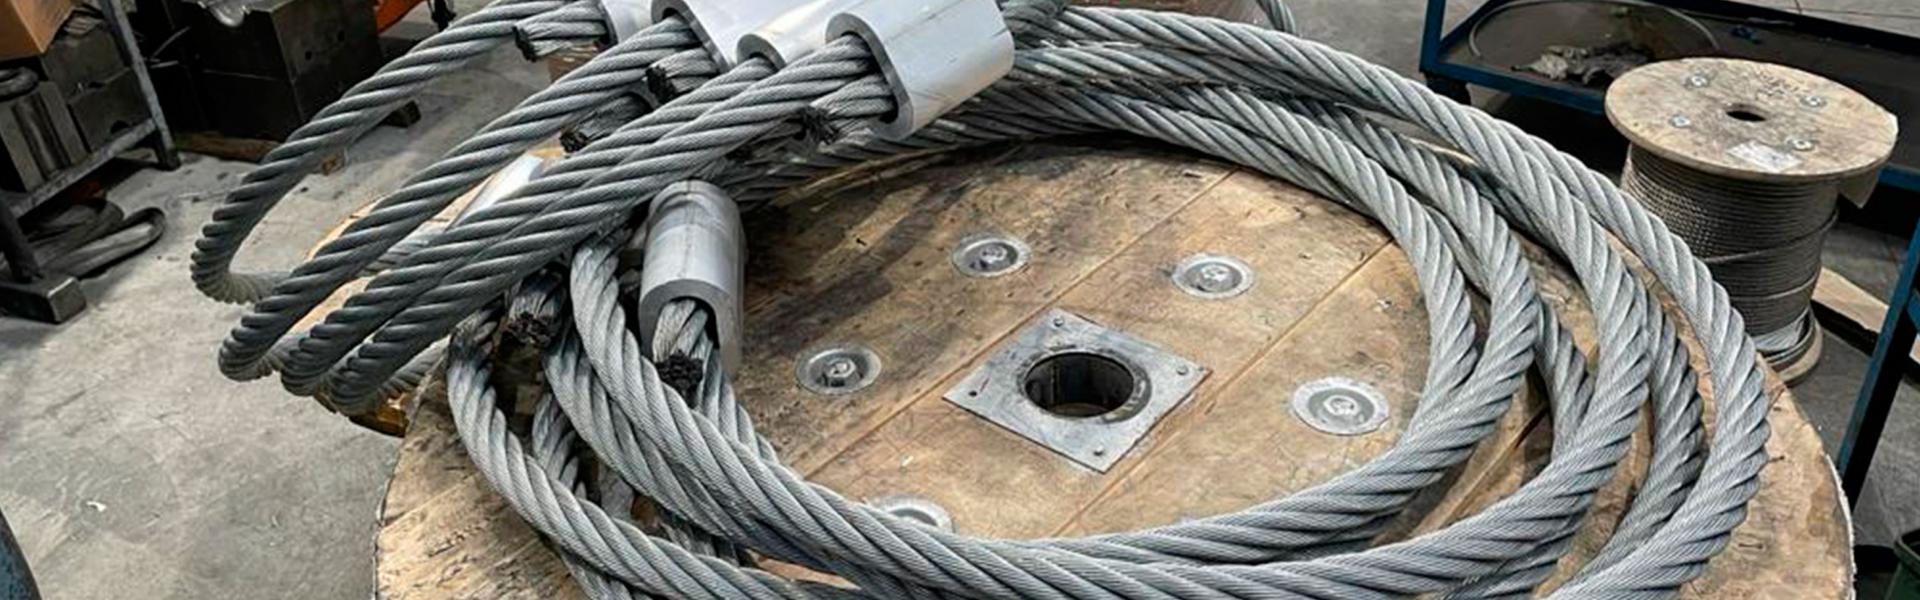 Steel wire rope rings for lifting precast concrete elements